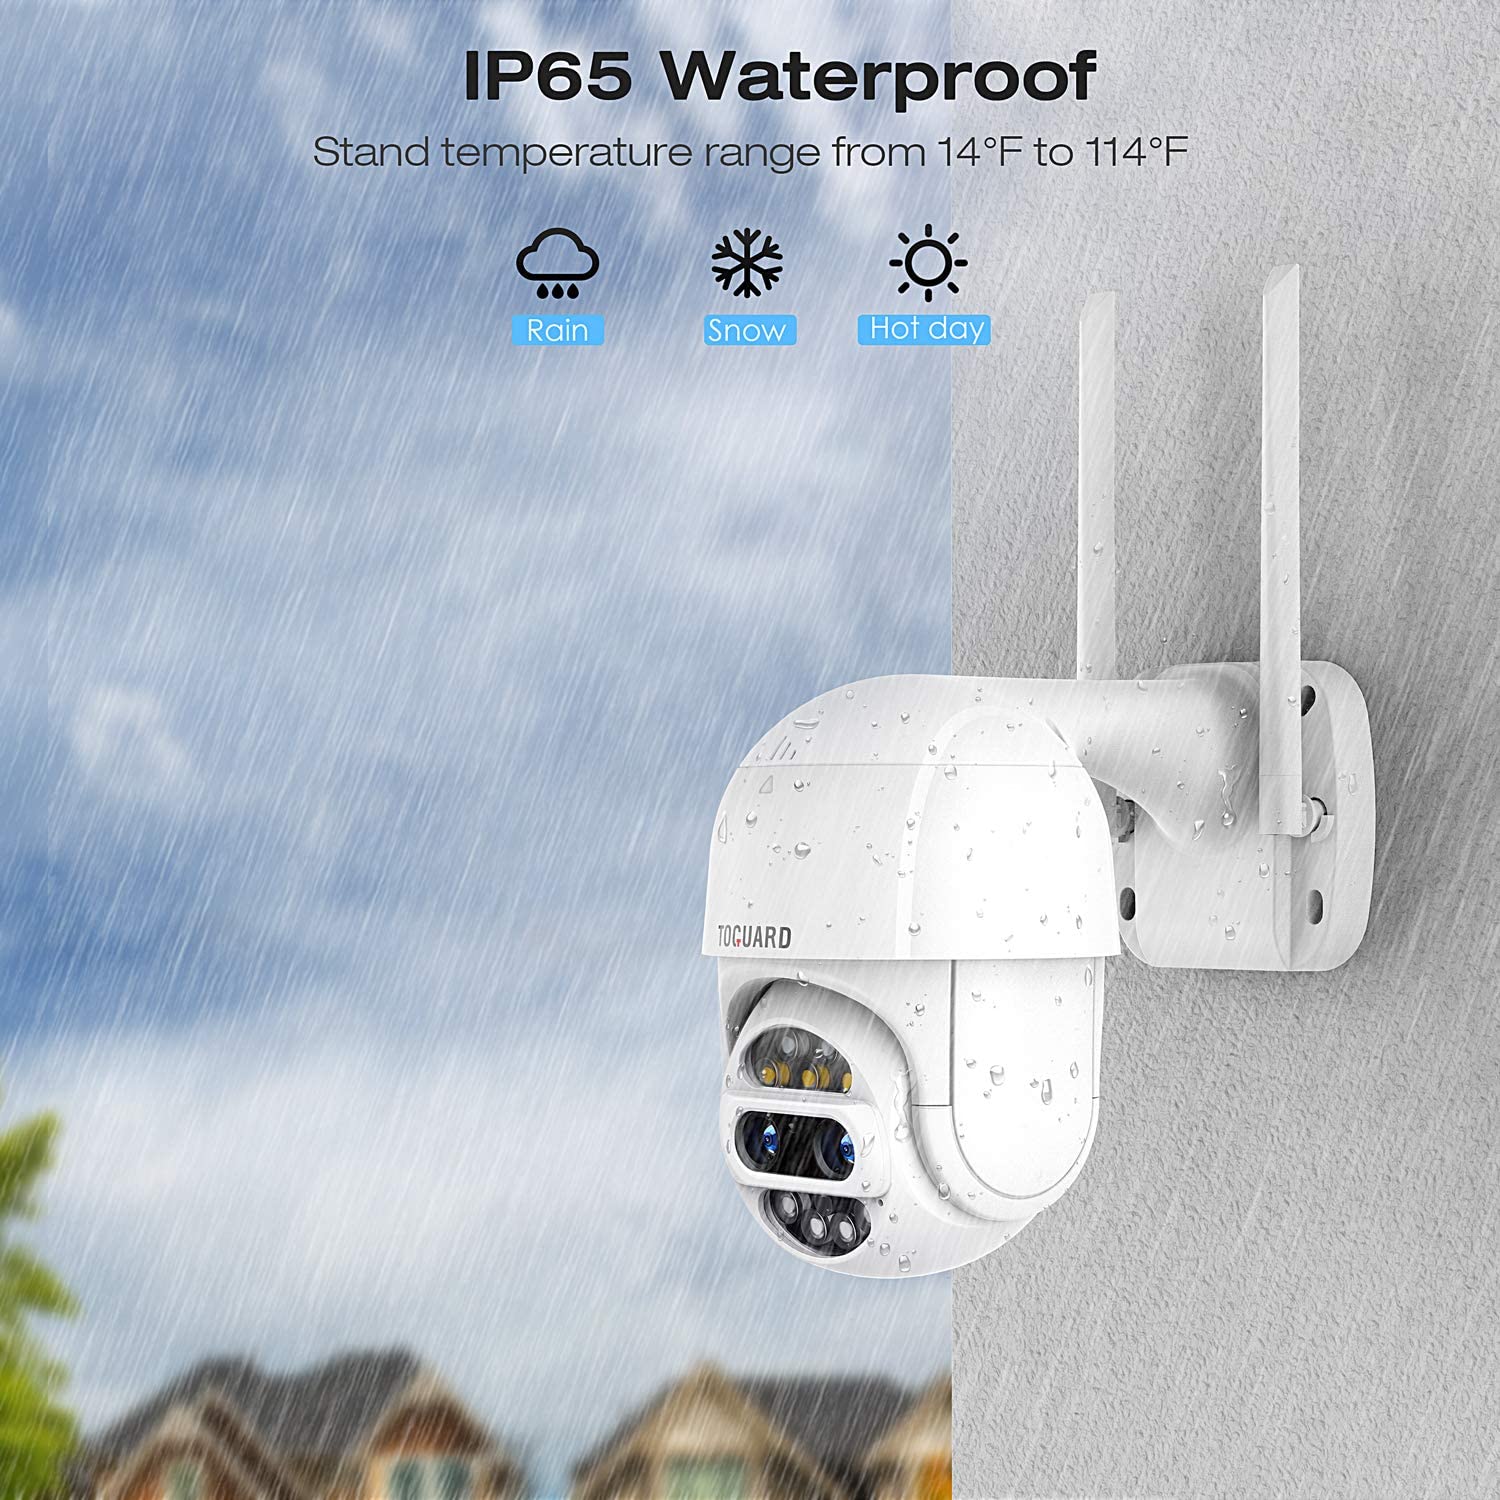 TOGUARD AP30 2MP Dual Lens,  WiFi Home Surveillance with Motion Detection, Weatherproof , PTZ Outdoor Security Camera（Only available in the US and Canada）